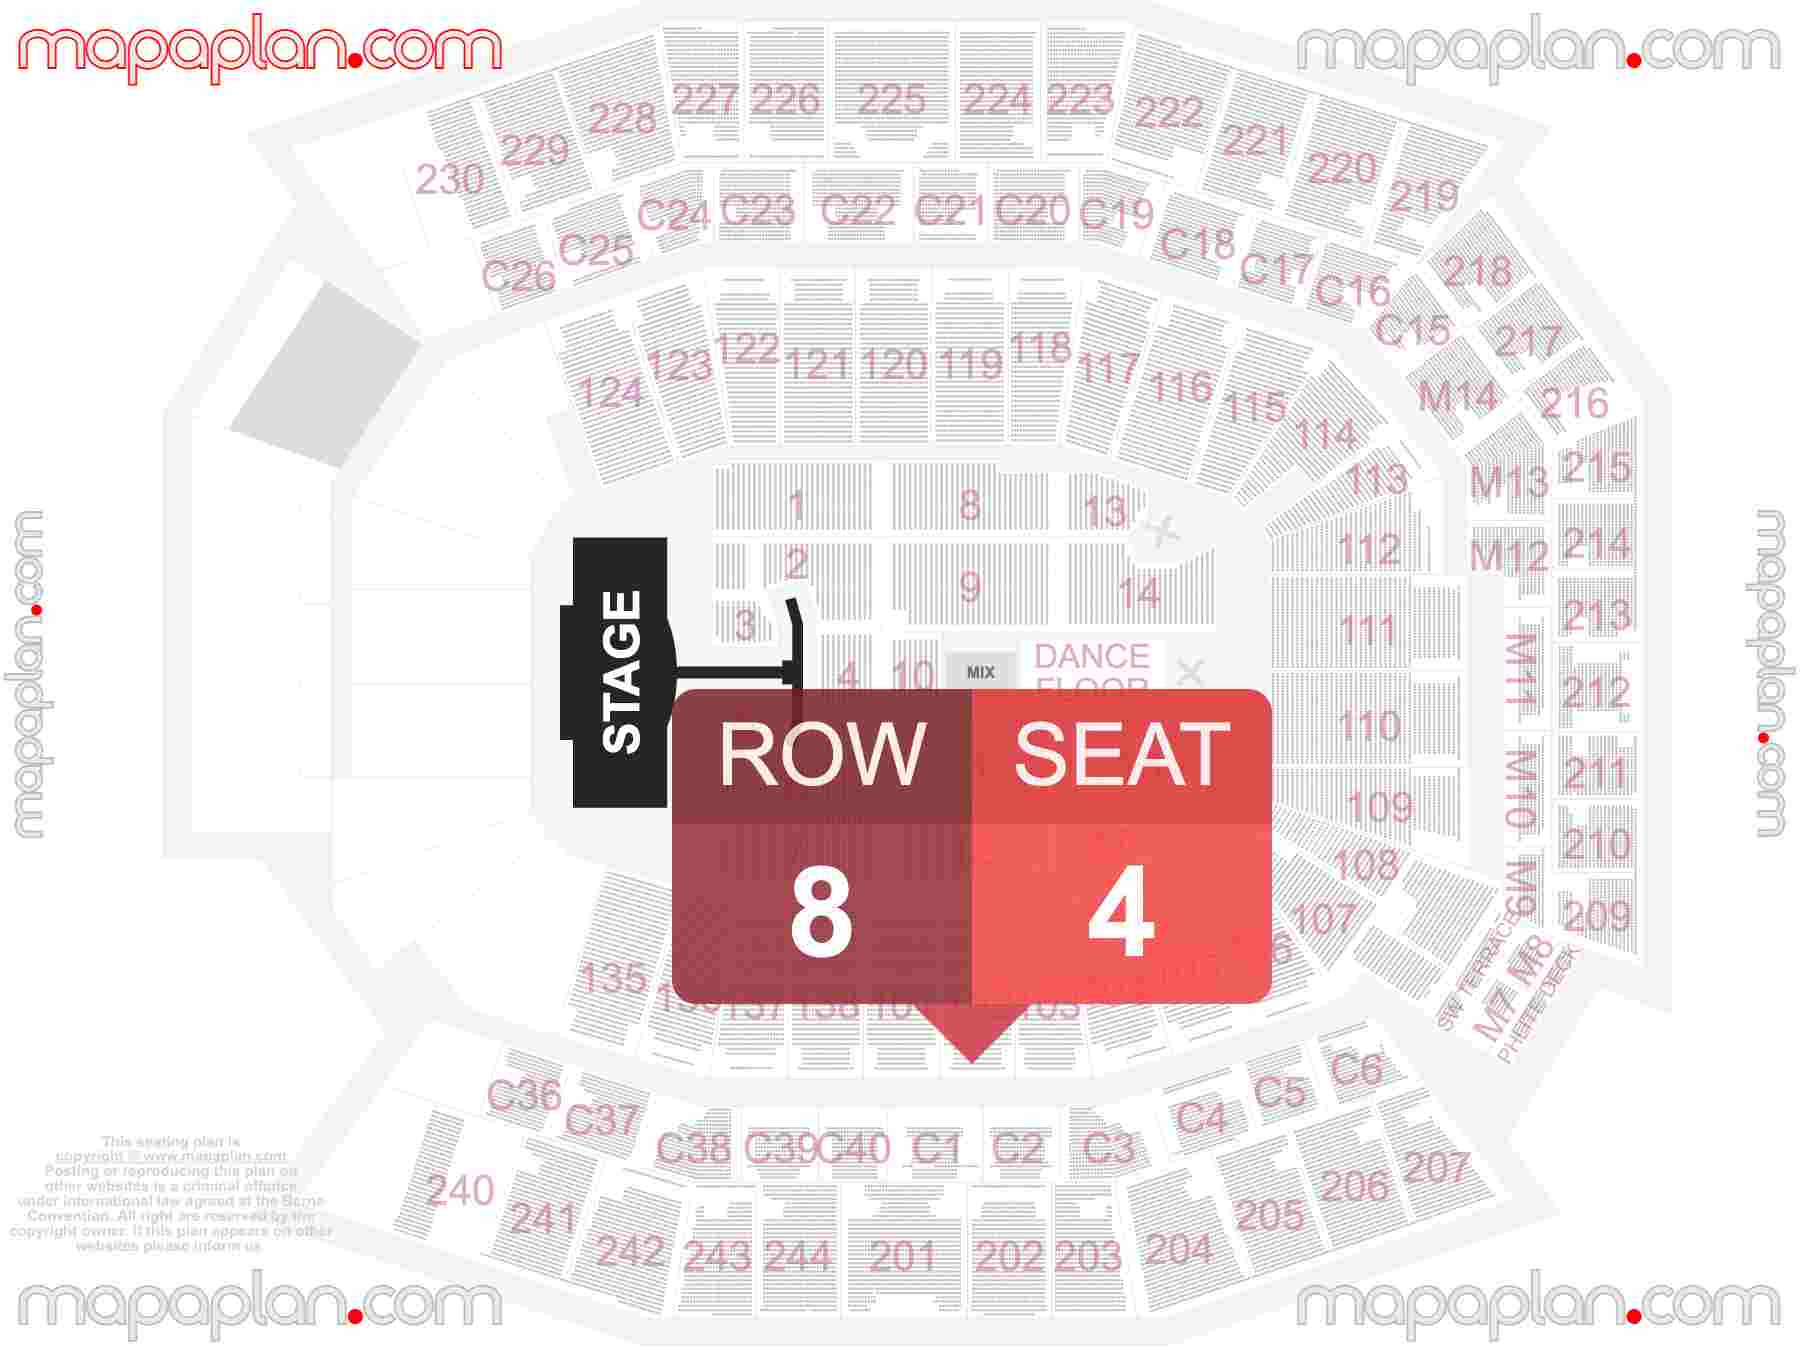 Philadelphia Lincoln Financial Field seating chart Concert detailed seat numbers and row numbering chart with interactive map plan layout